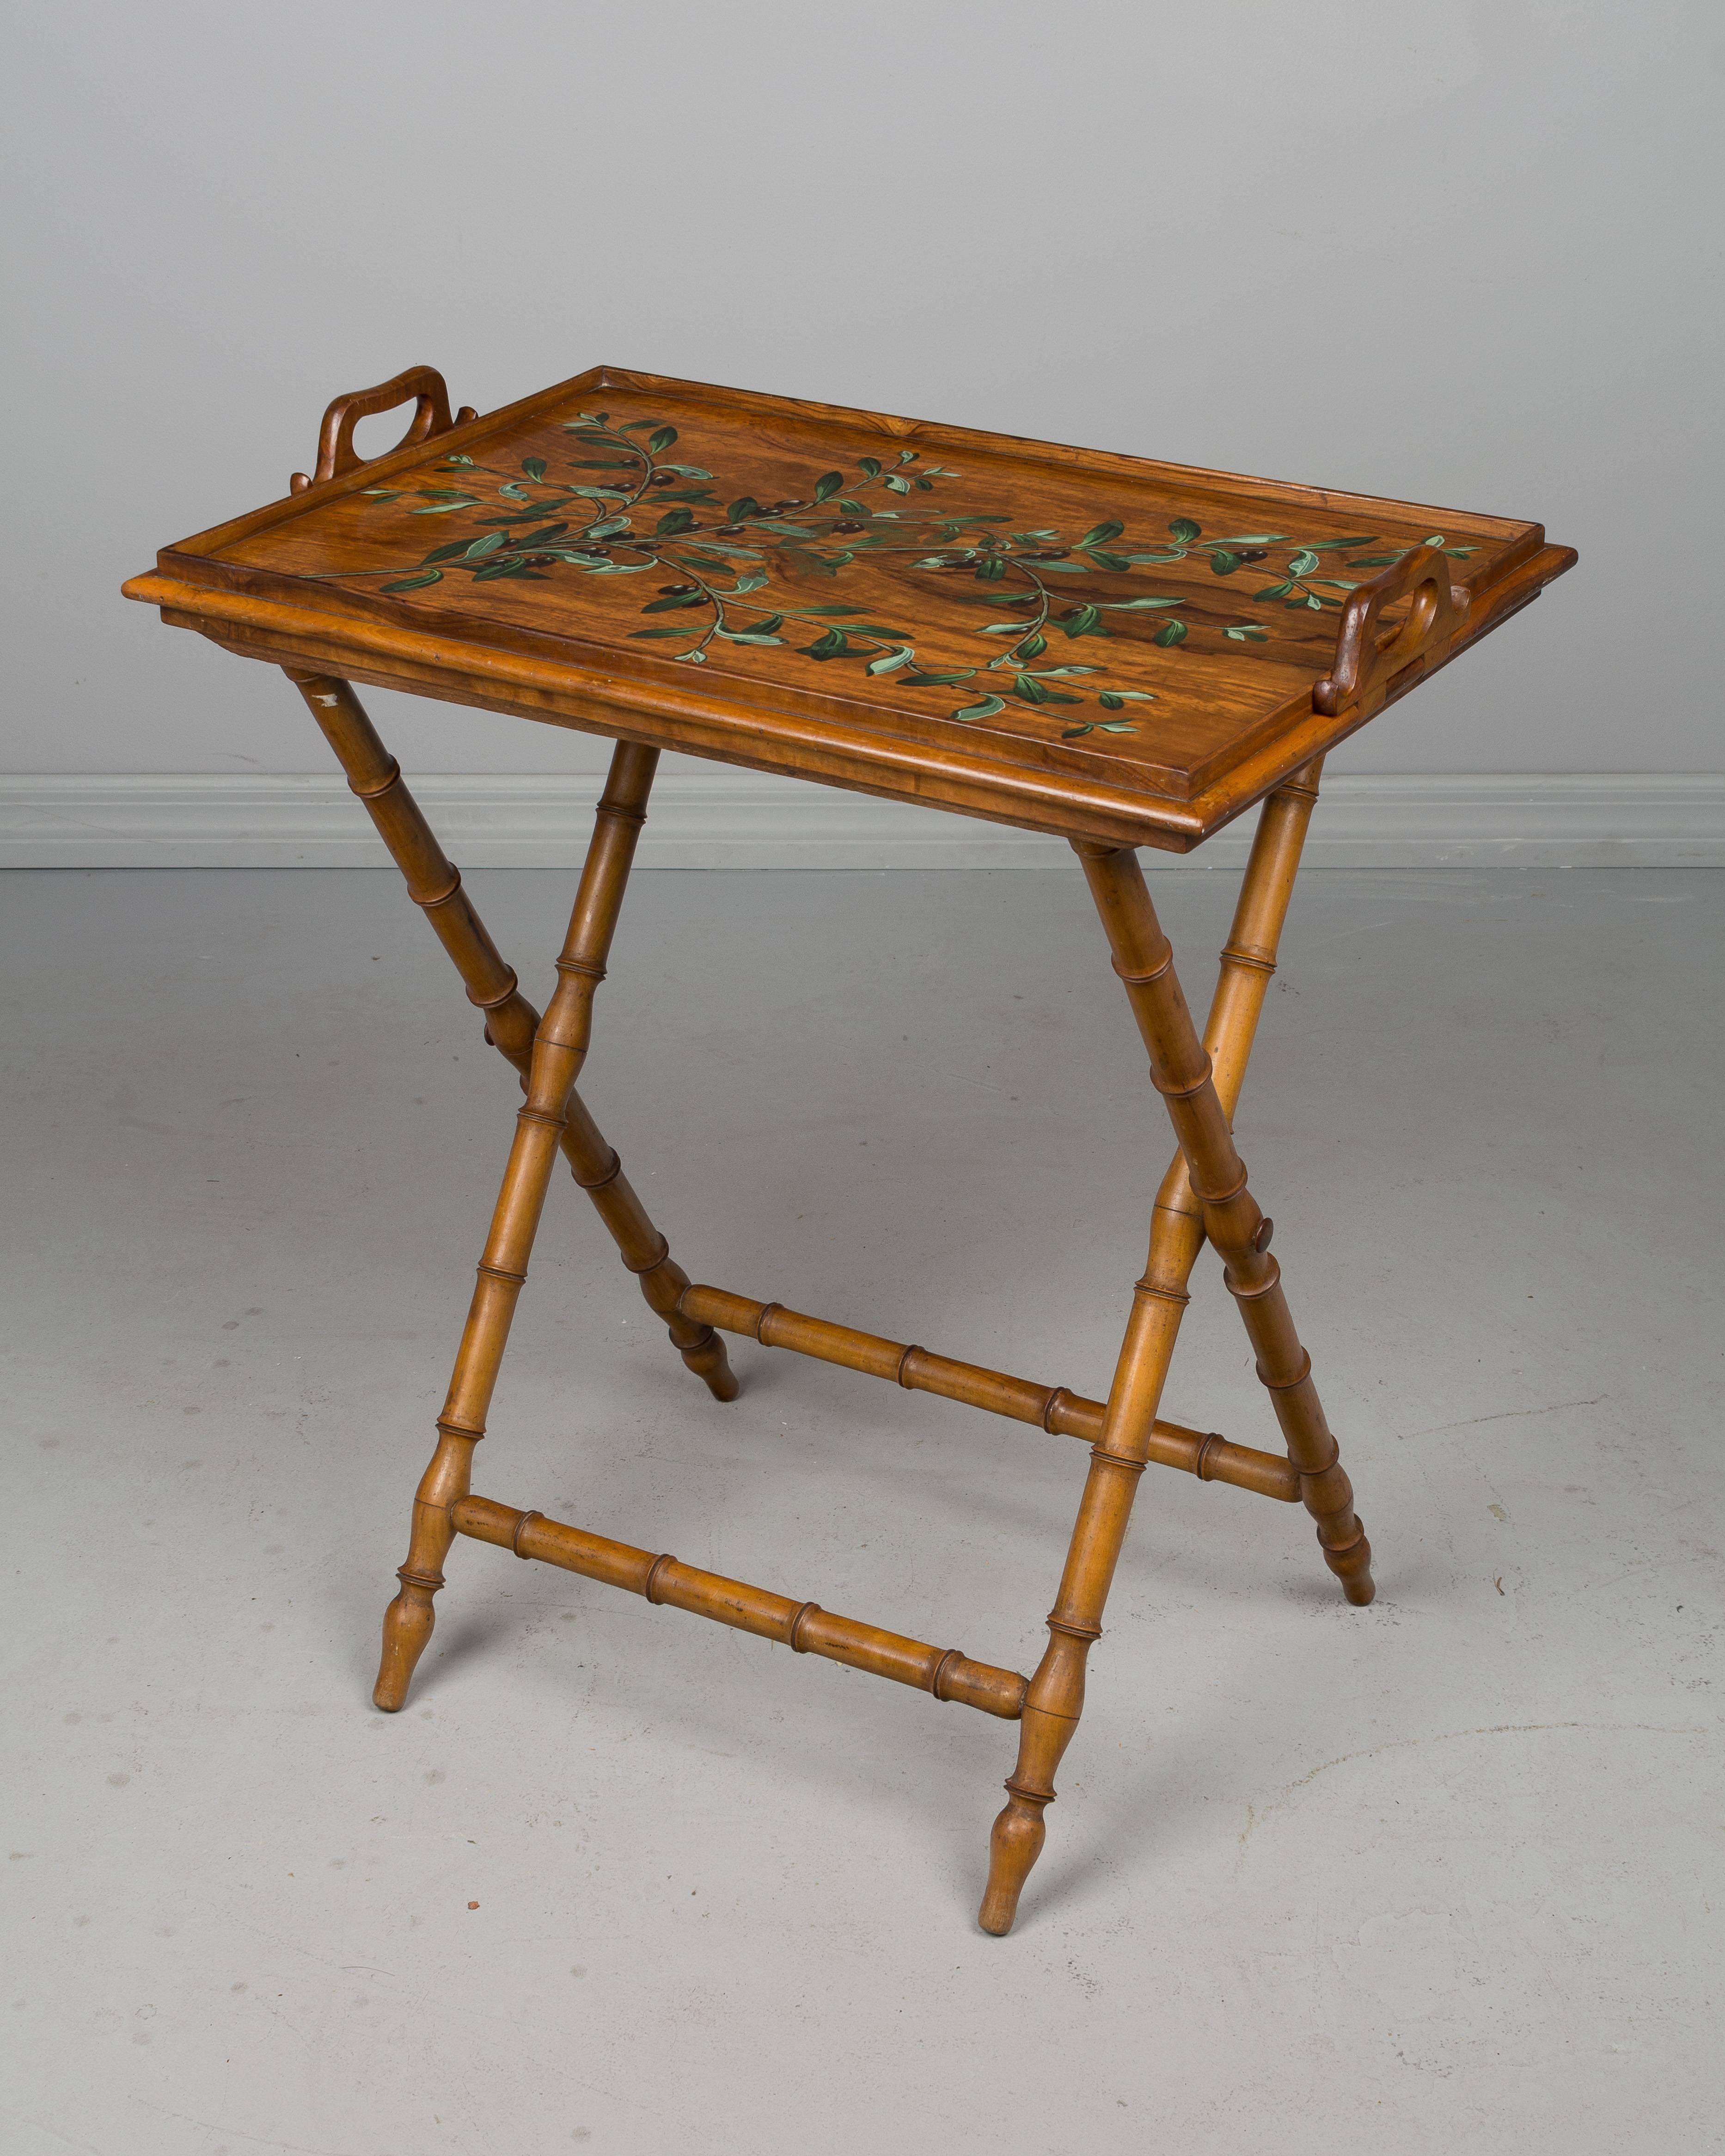 A French faux bamboo folding tray table with a base made of solid cherry and the reversible tray made of olive wood. One side of the tray is decorated with painted olive branches and the flip side has a red felted surface. The handles are hinged so